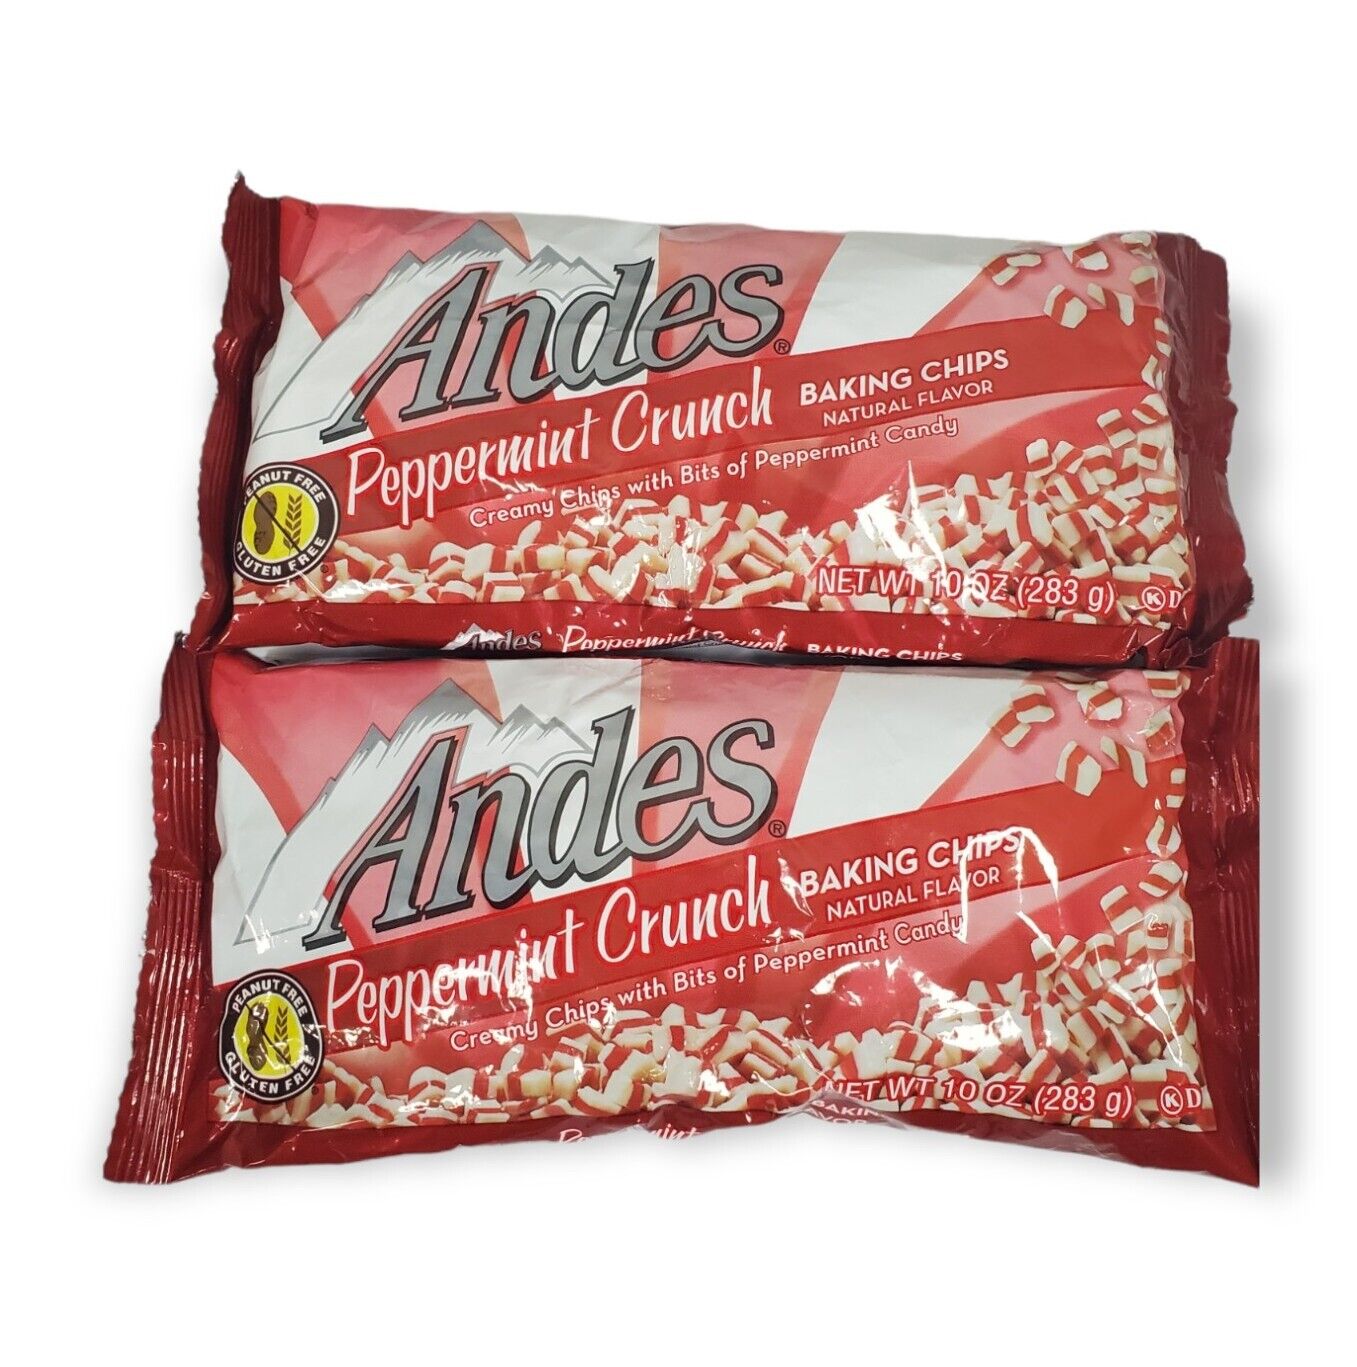 2-andes Peppermint Crunch Baking Chips 10 Oz